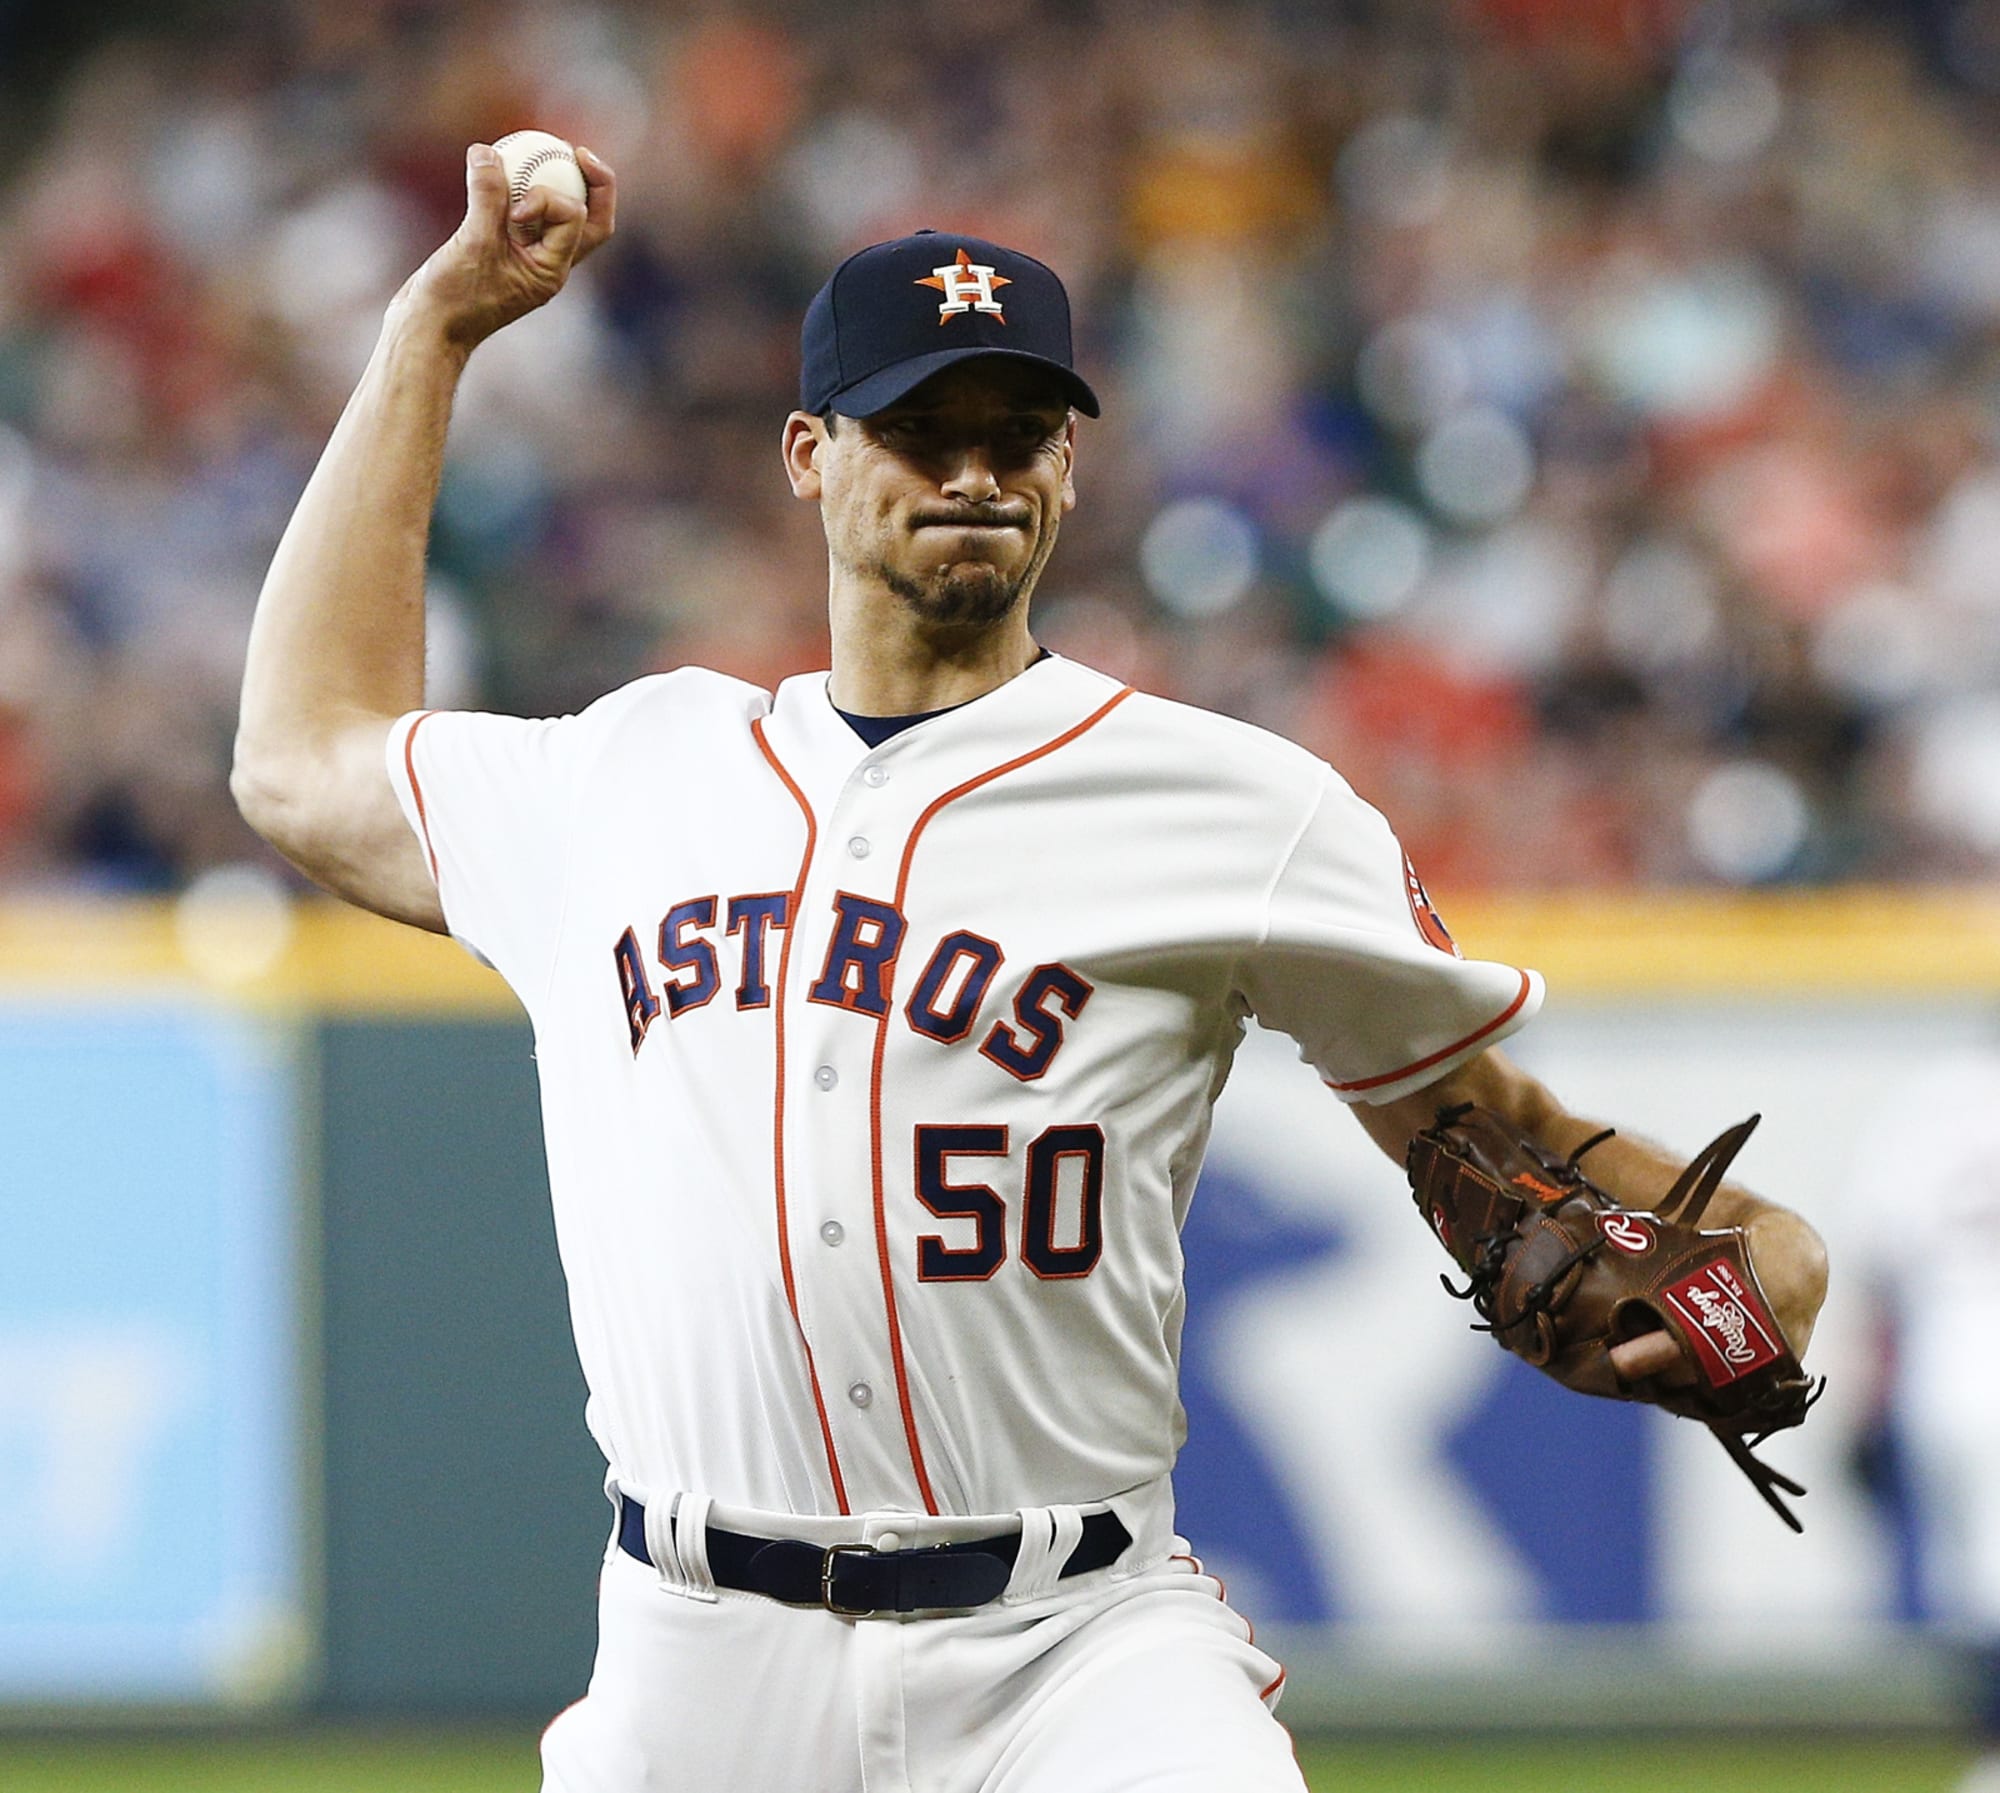 Houston Astros: Charlie Morton's All-Star appearance adds to great story